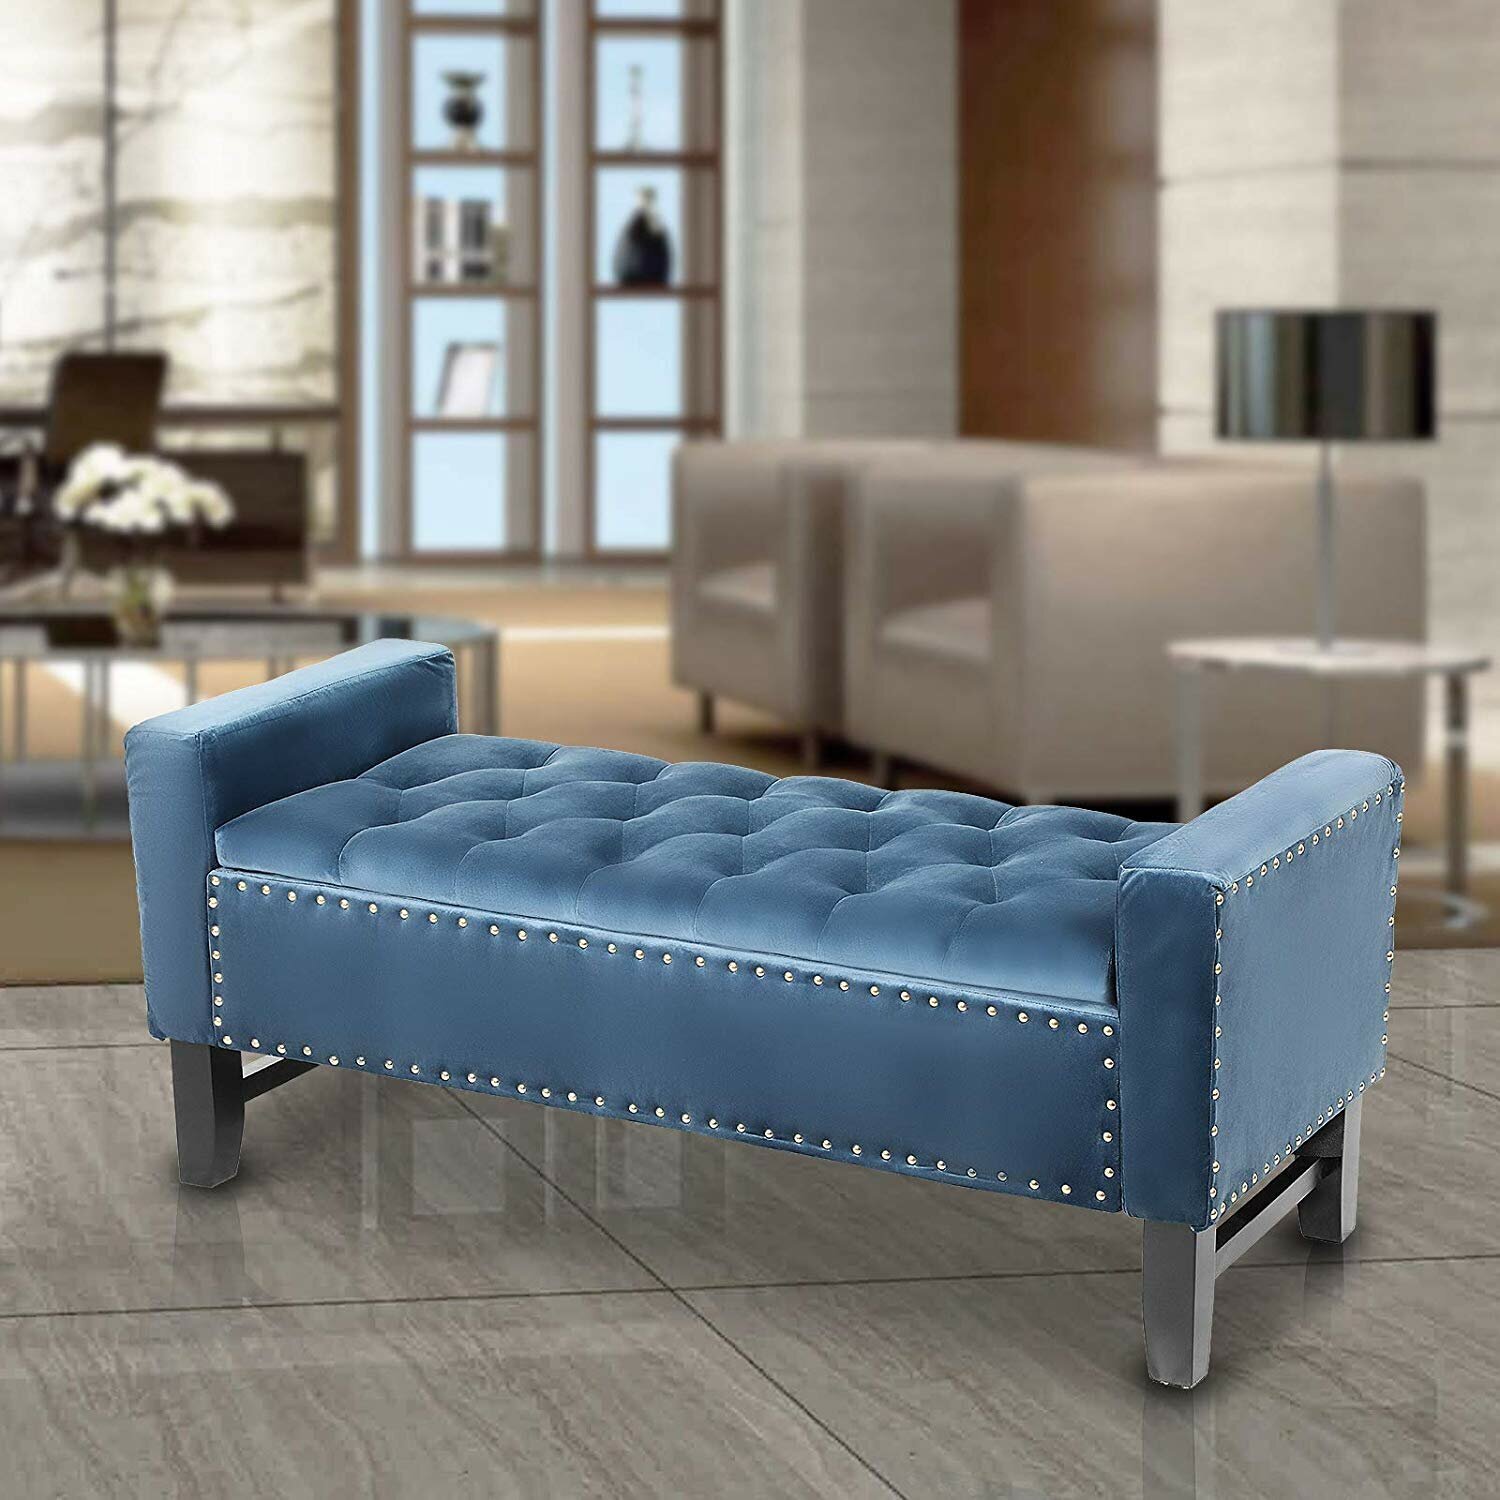 Microfiber Upholstered Storage Bench With Arms